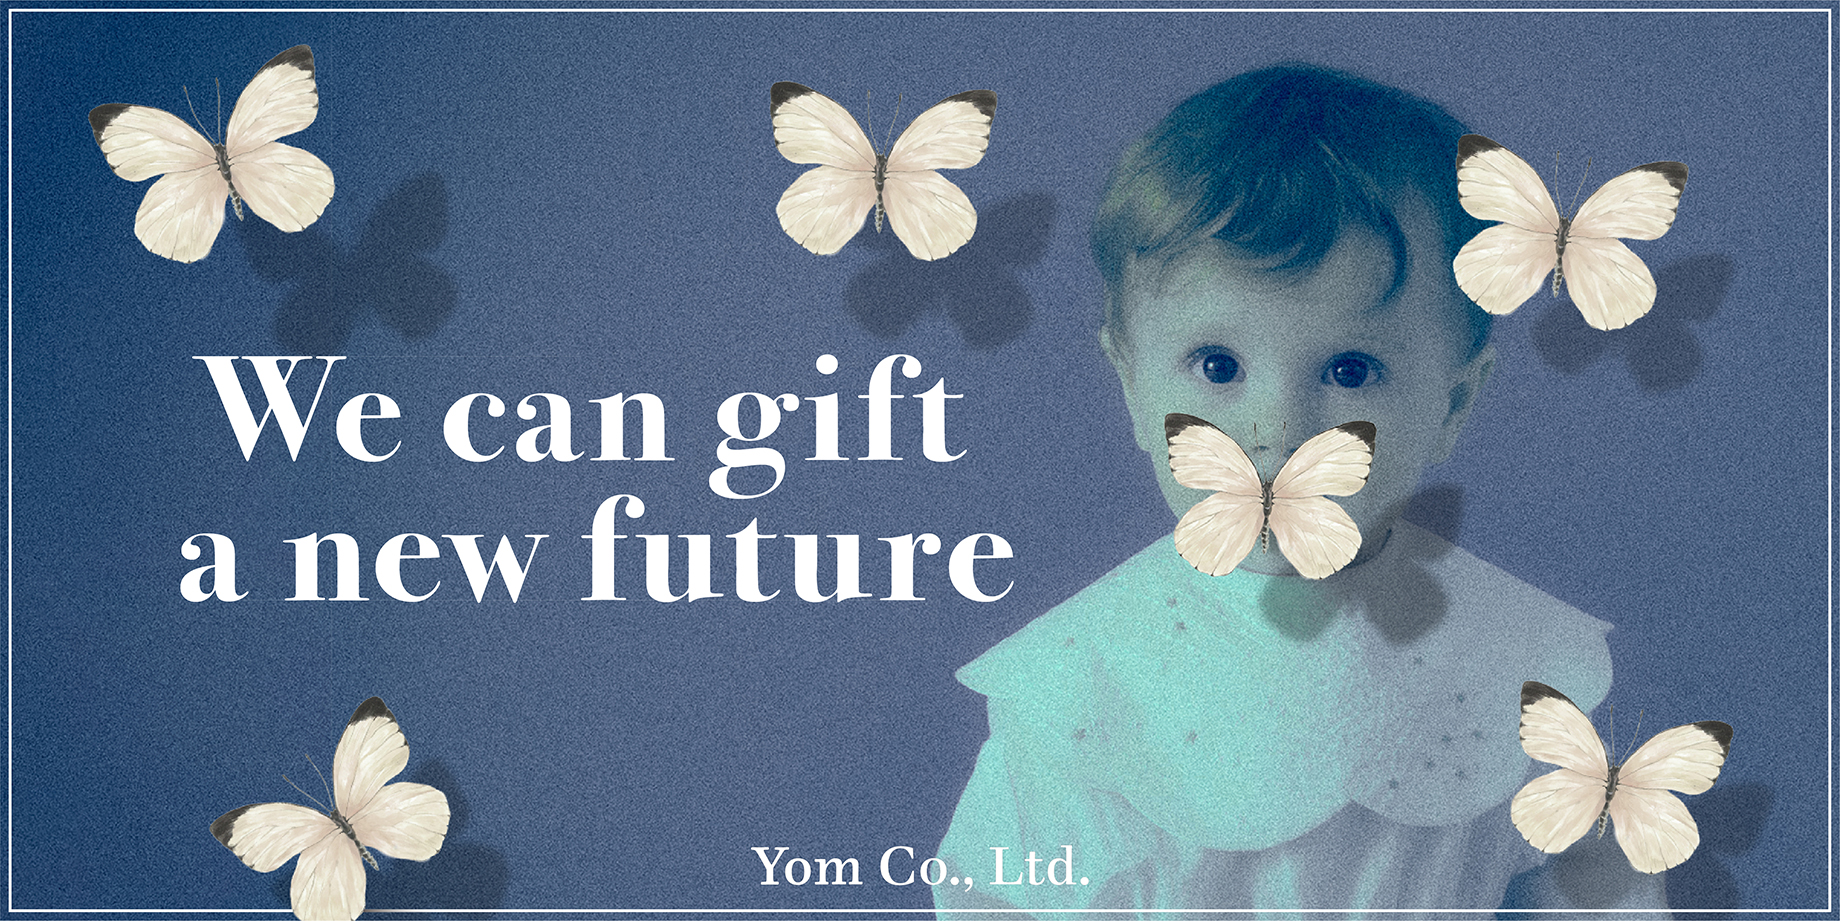 We can gift a new future